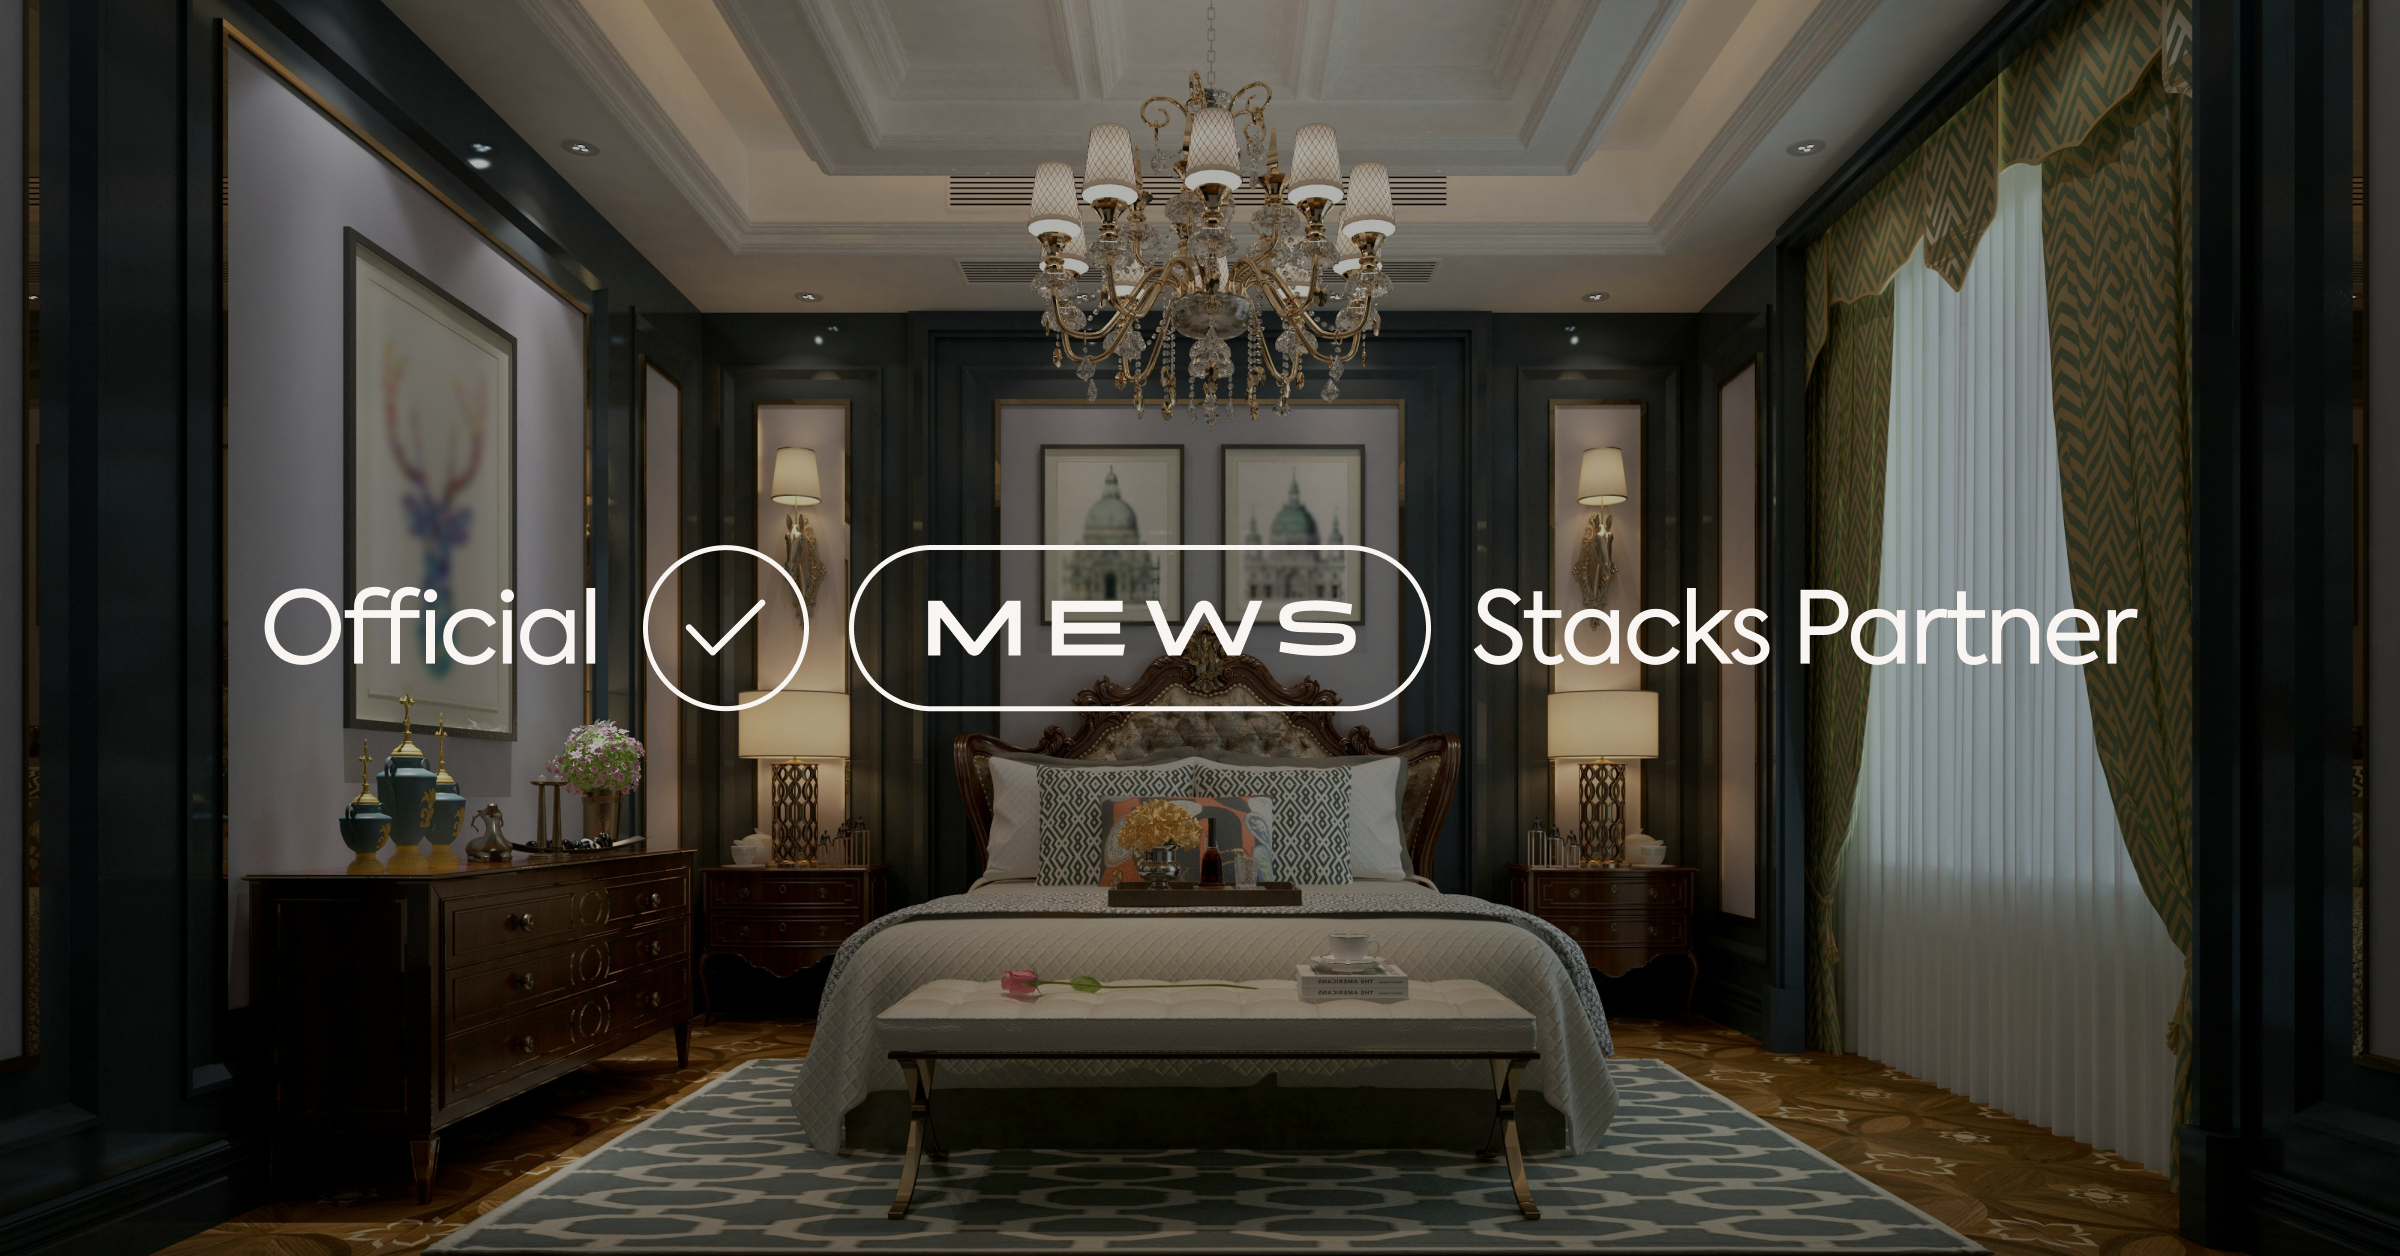 Sweeply is now Mews Stack Partner